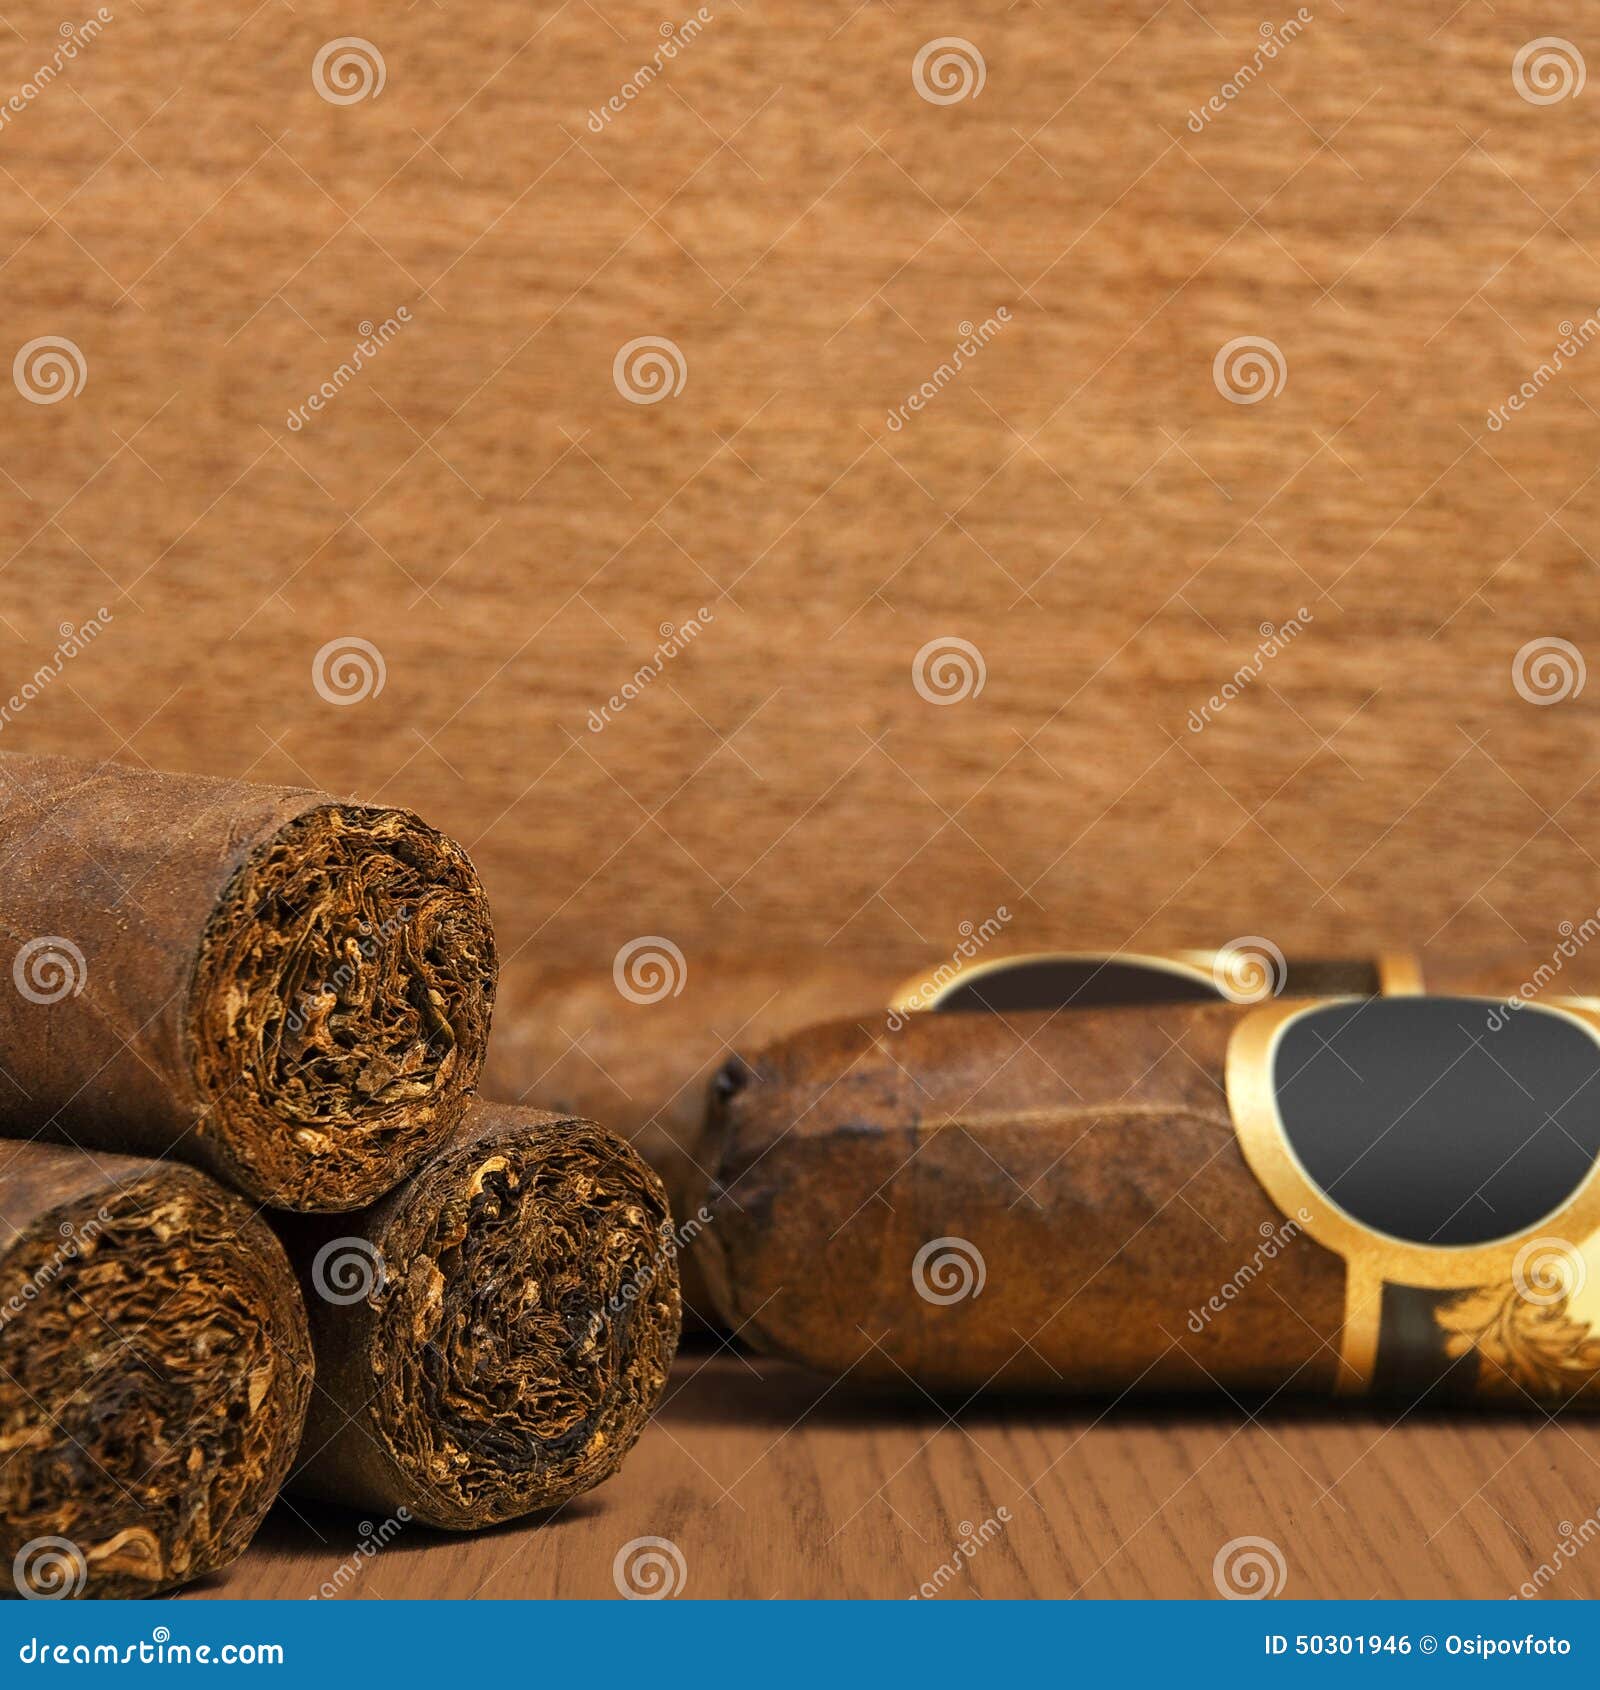 cuban cigars on wooden background